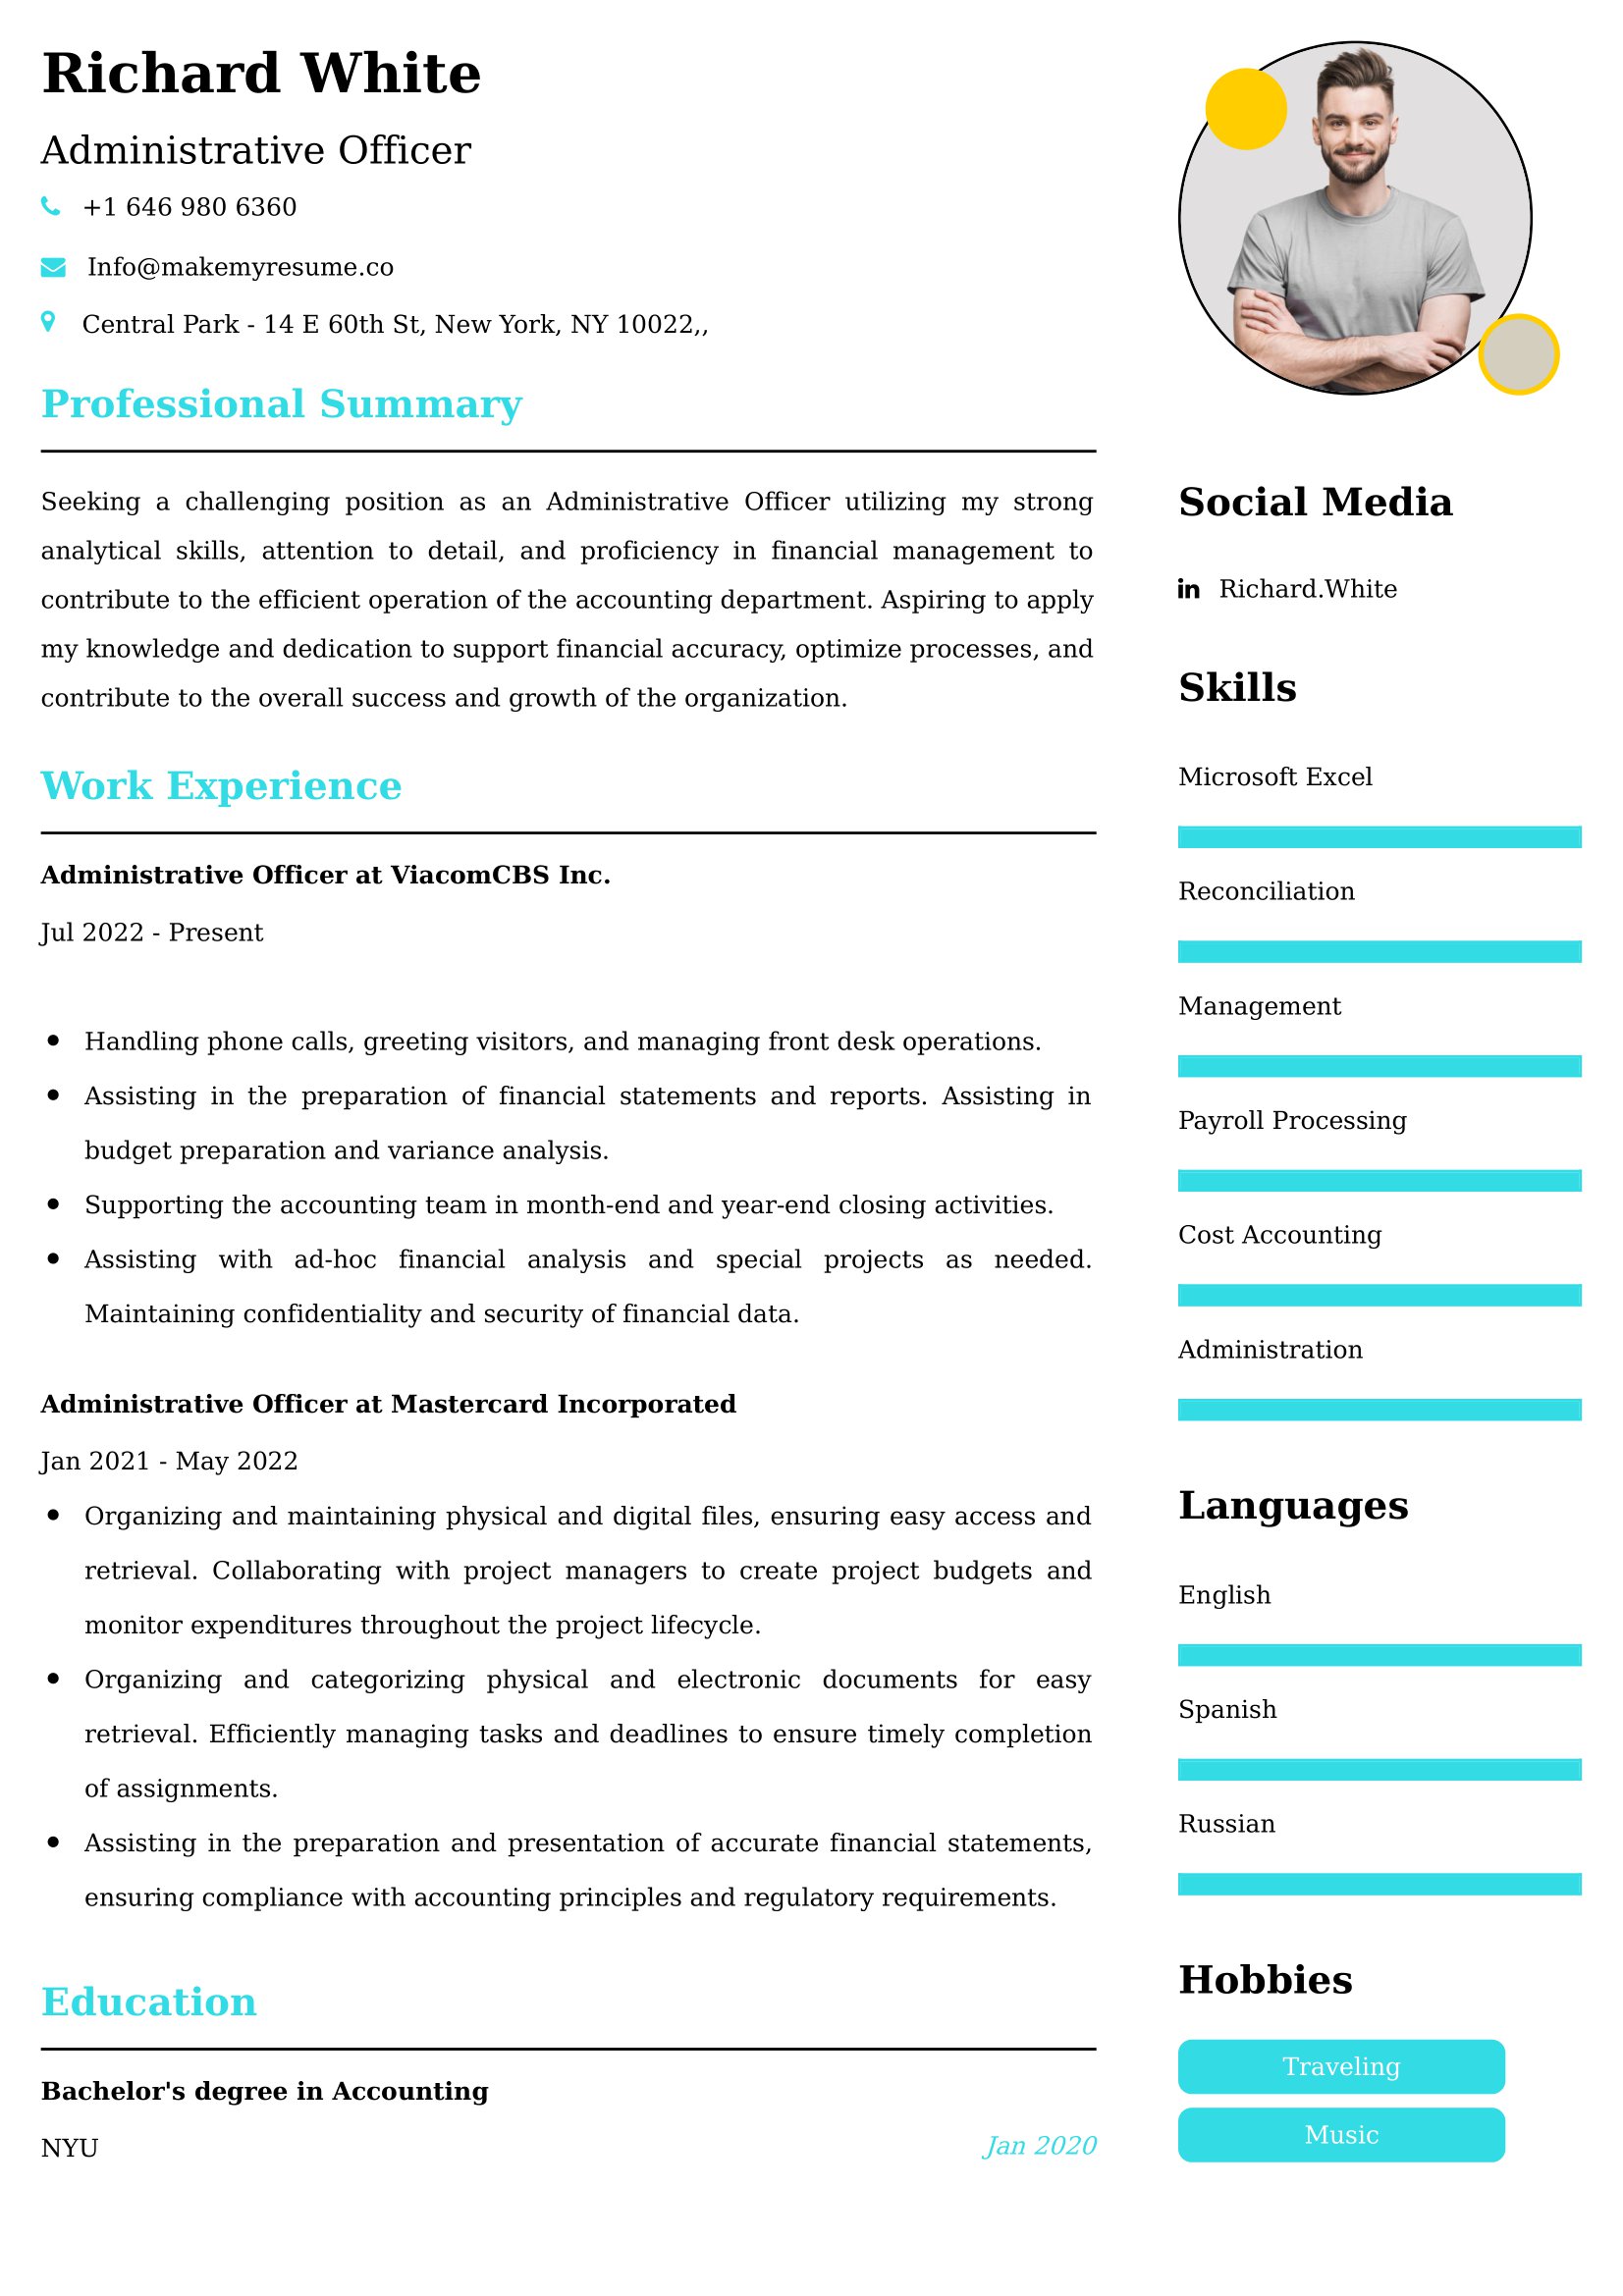 Administrative Officer Resume Examples - Brazilian Format, Latest Template